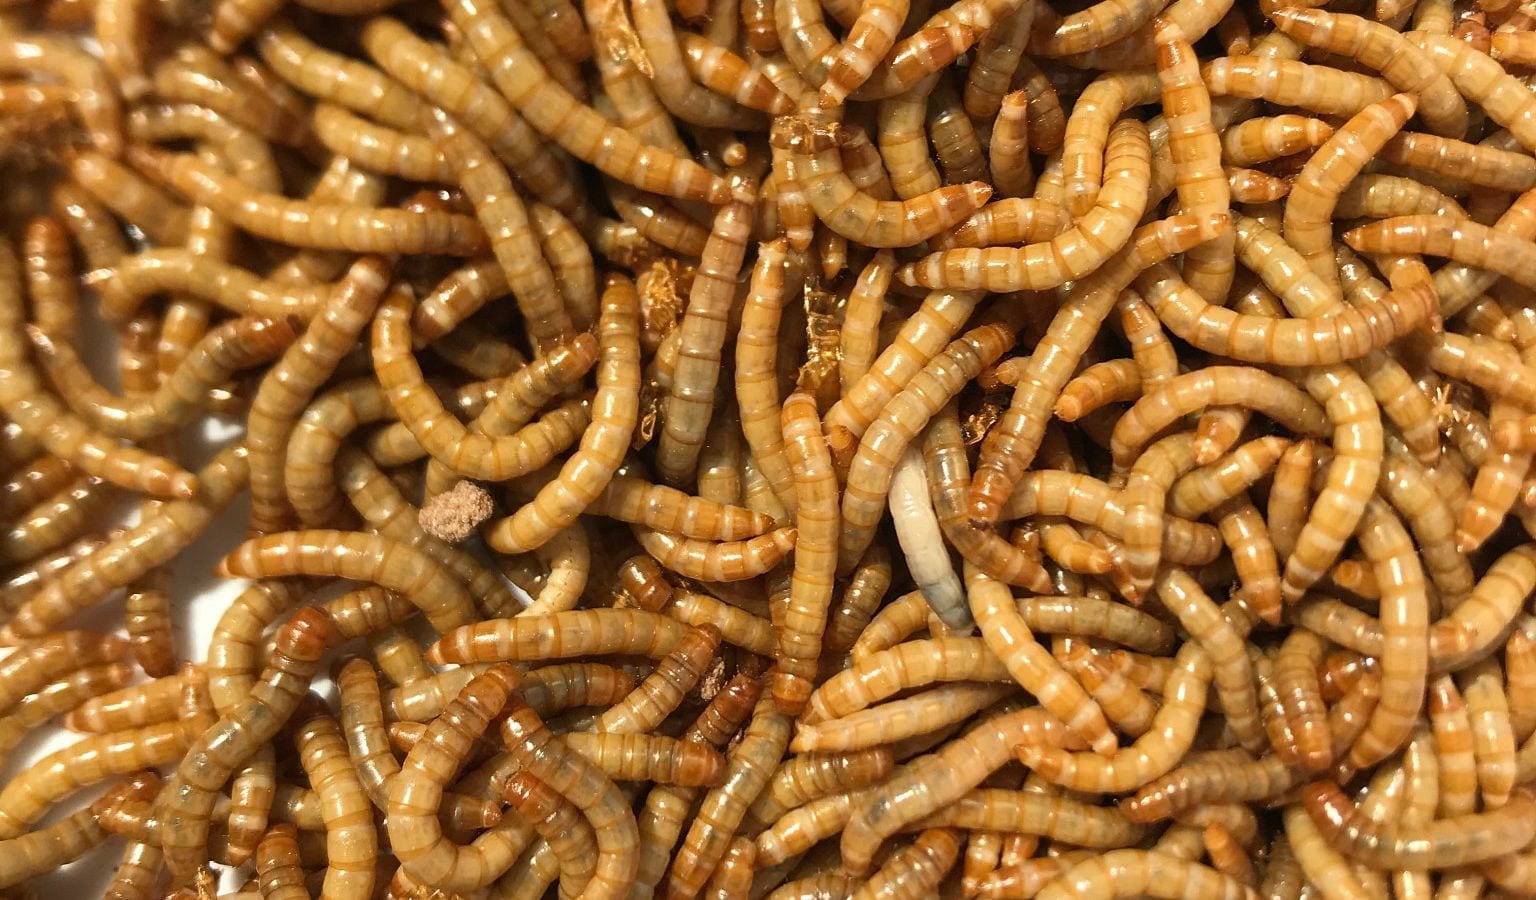 The yellow mealworm species Tenebrio molitor. An IUPUI-led study finds the insect could serve as a good alternate protein source in agriculture. Photo by Ti Eriksson, Beta Hatch